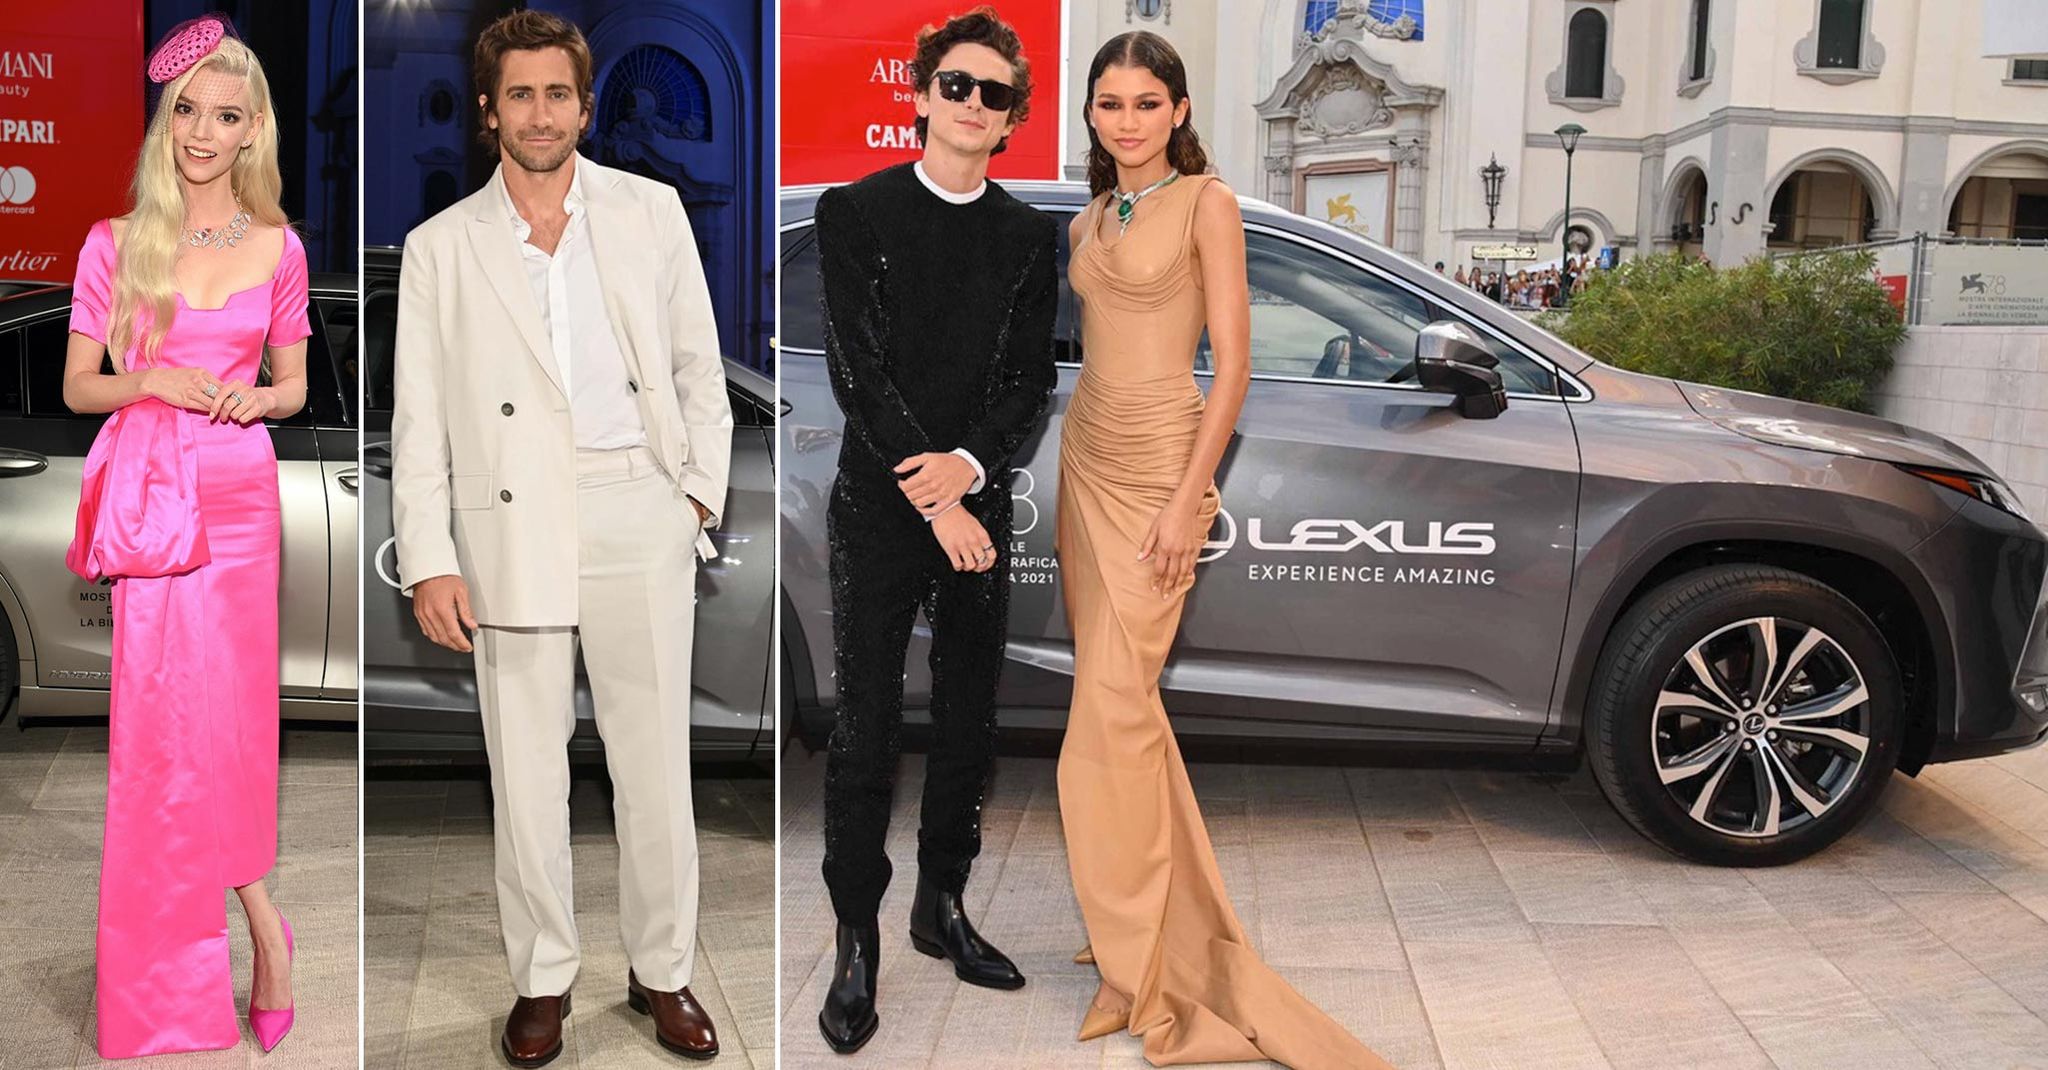 Stars arrive in style in a constellation of Lexus vehicles at Venice Film Festival